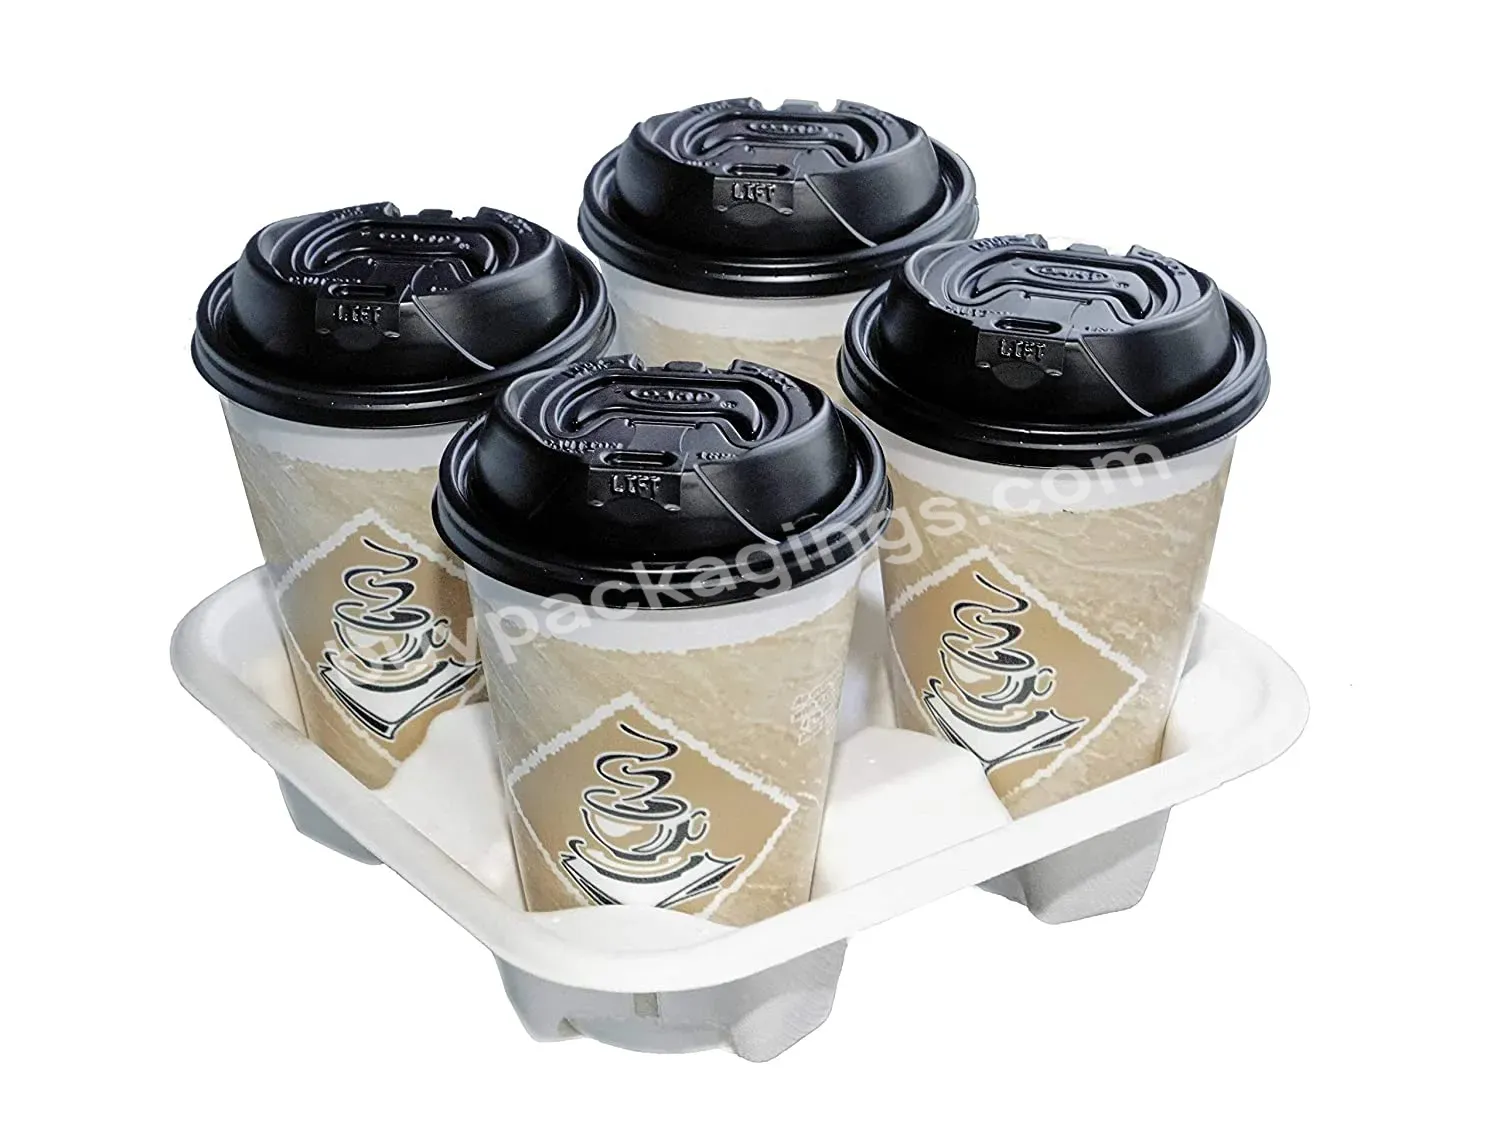 Disposable Drink Carriers White Biodegradable Paper Pulp Cup Carrier Comes With 10 Paper Straws Free Sample - Buy Paper Pulp Drink Carrier,Free Sample Cup Holder,Coffee Cup Holder Tray.